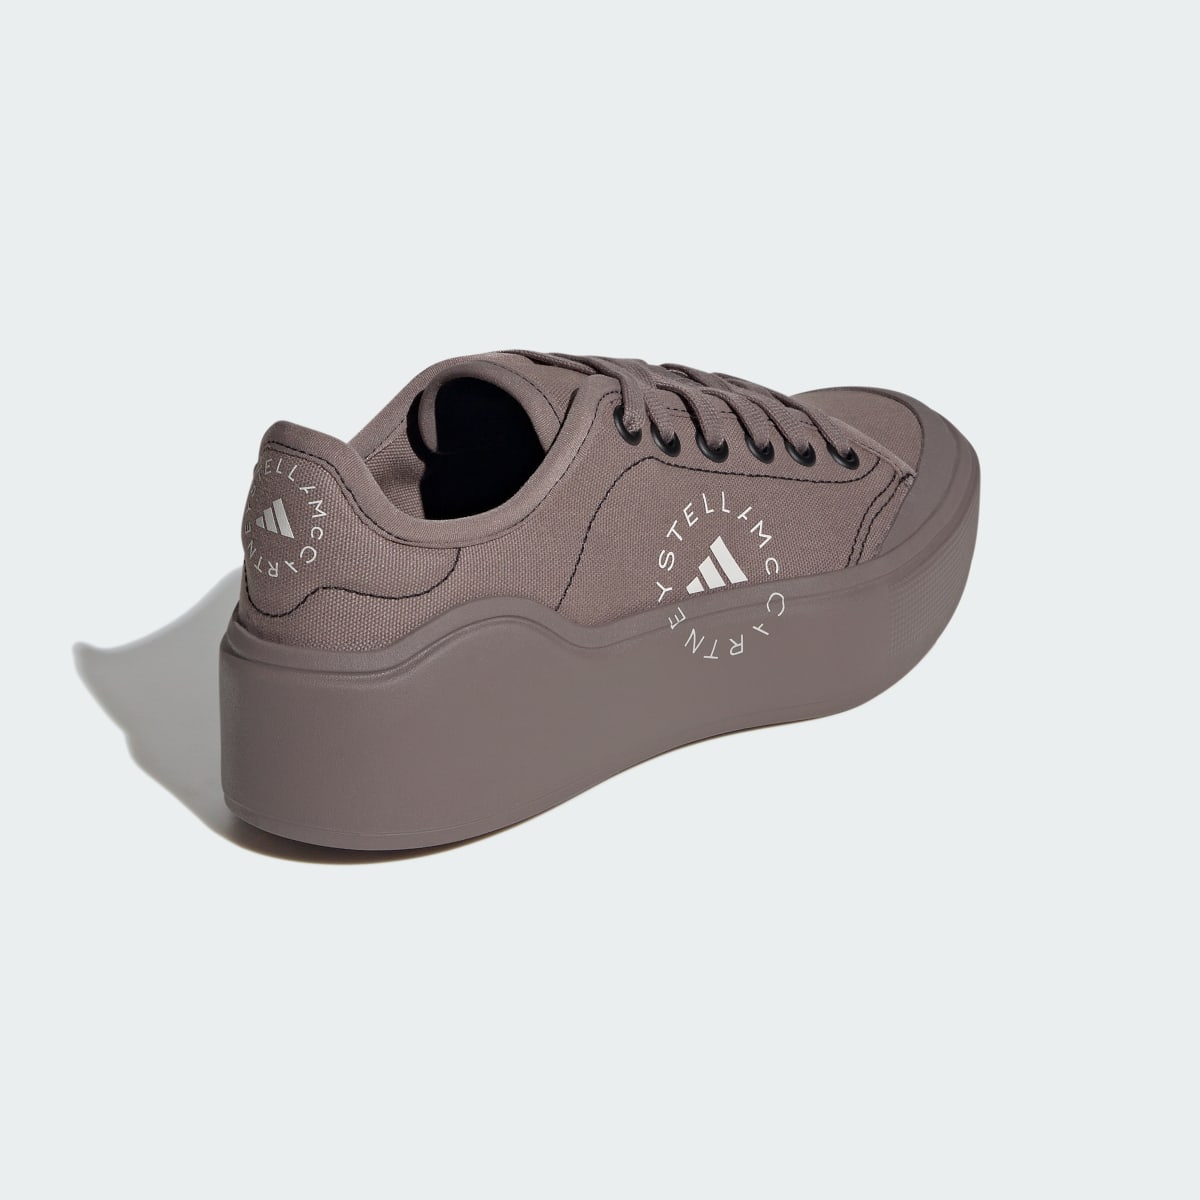 Adidas by Stella McCartney Court Shoes. 6